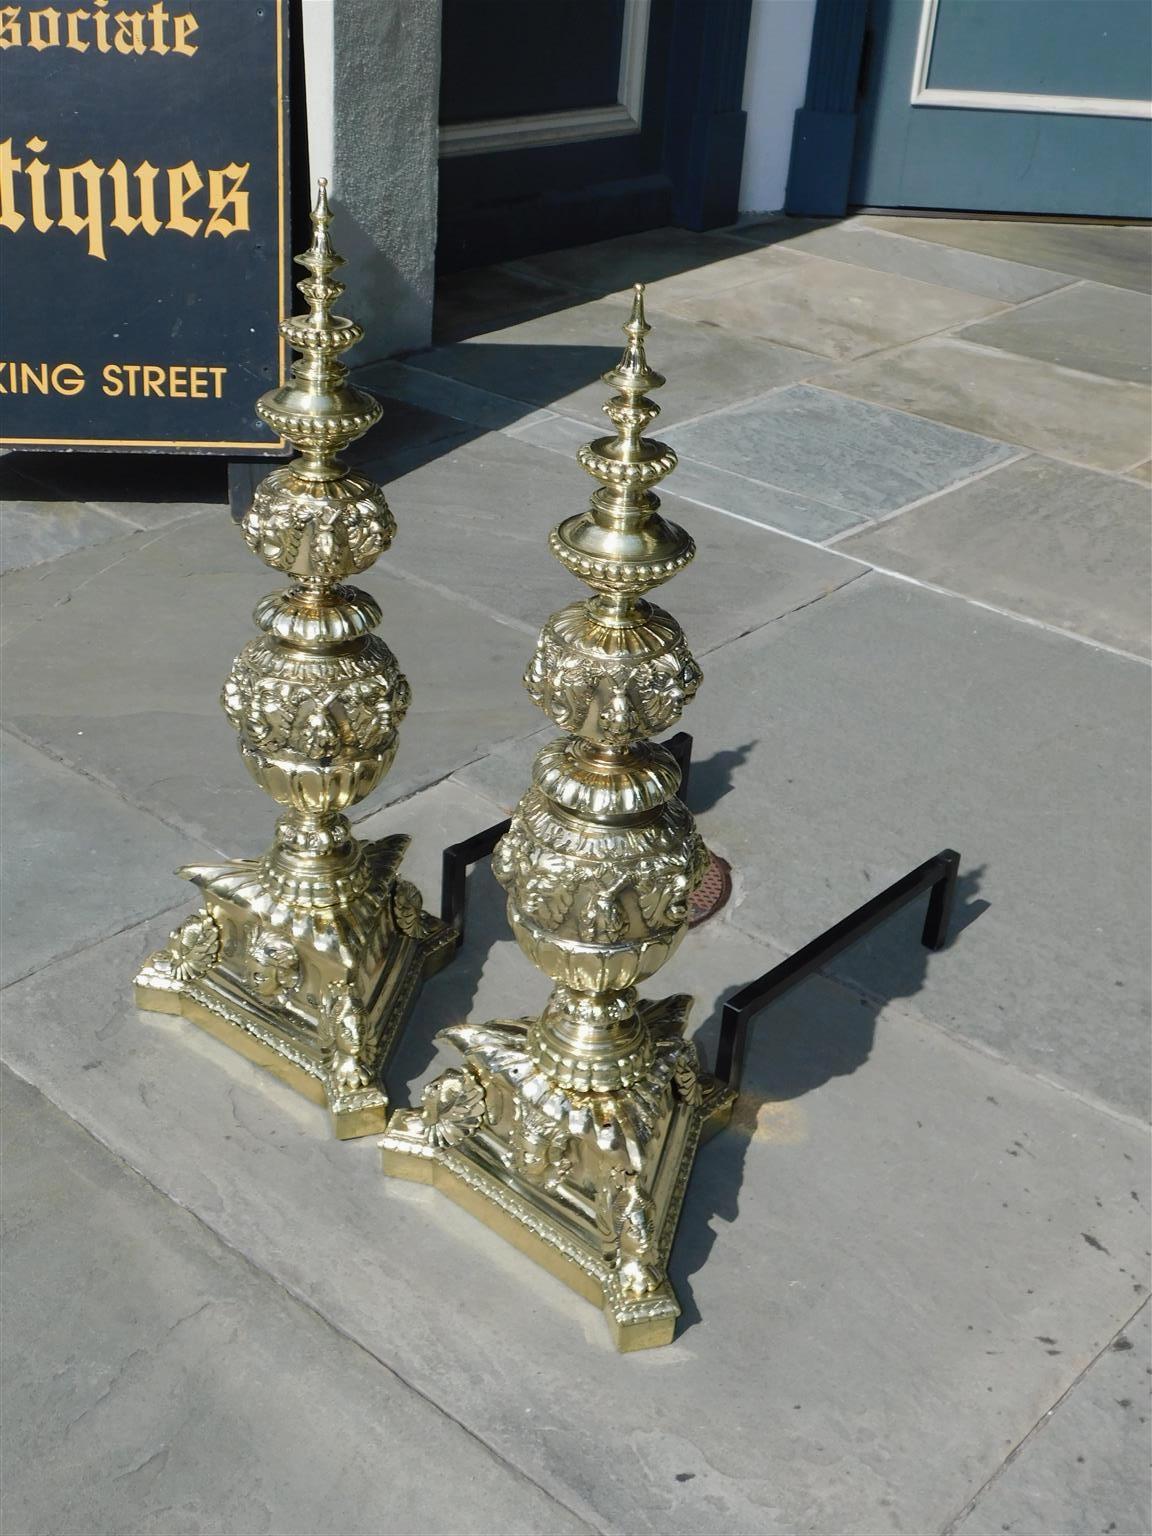 Pair of Italian Brass Neoclassical Figural Tiered Urn Finial Andirons, C. 1820 In Excellent Condition For Sale In Hollywood, SC